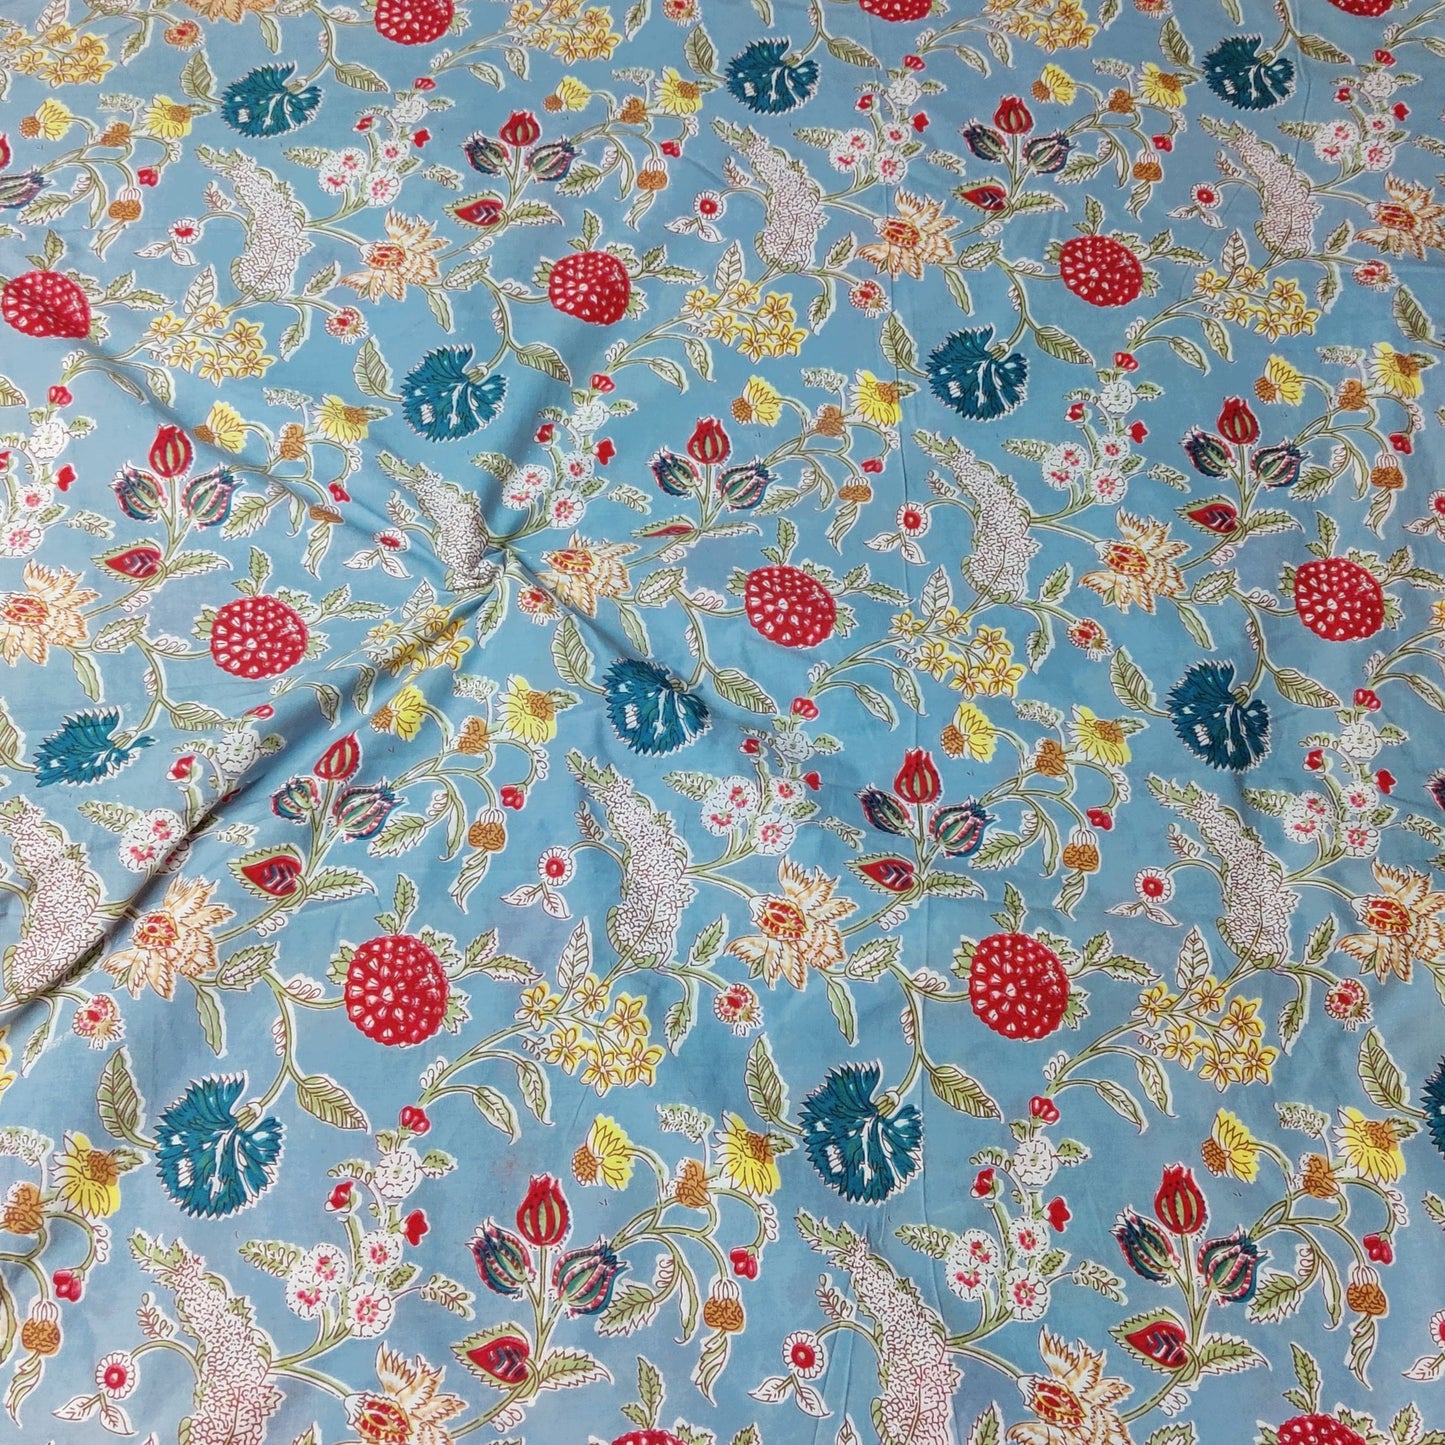 Tropical Light Blue cambric Fabric Width 44 inches Fabric per meter